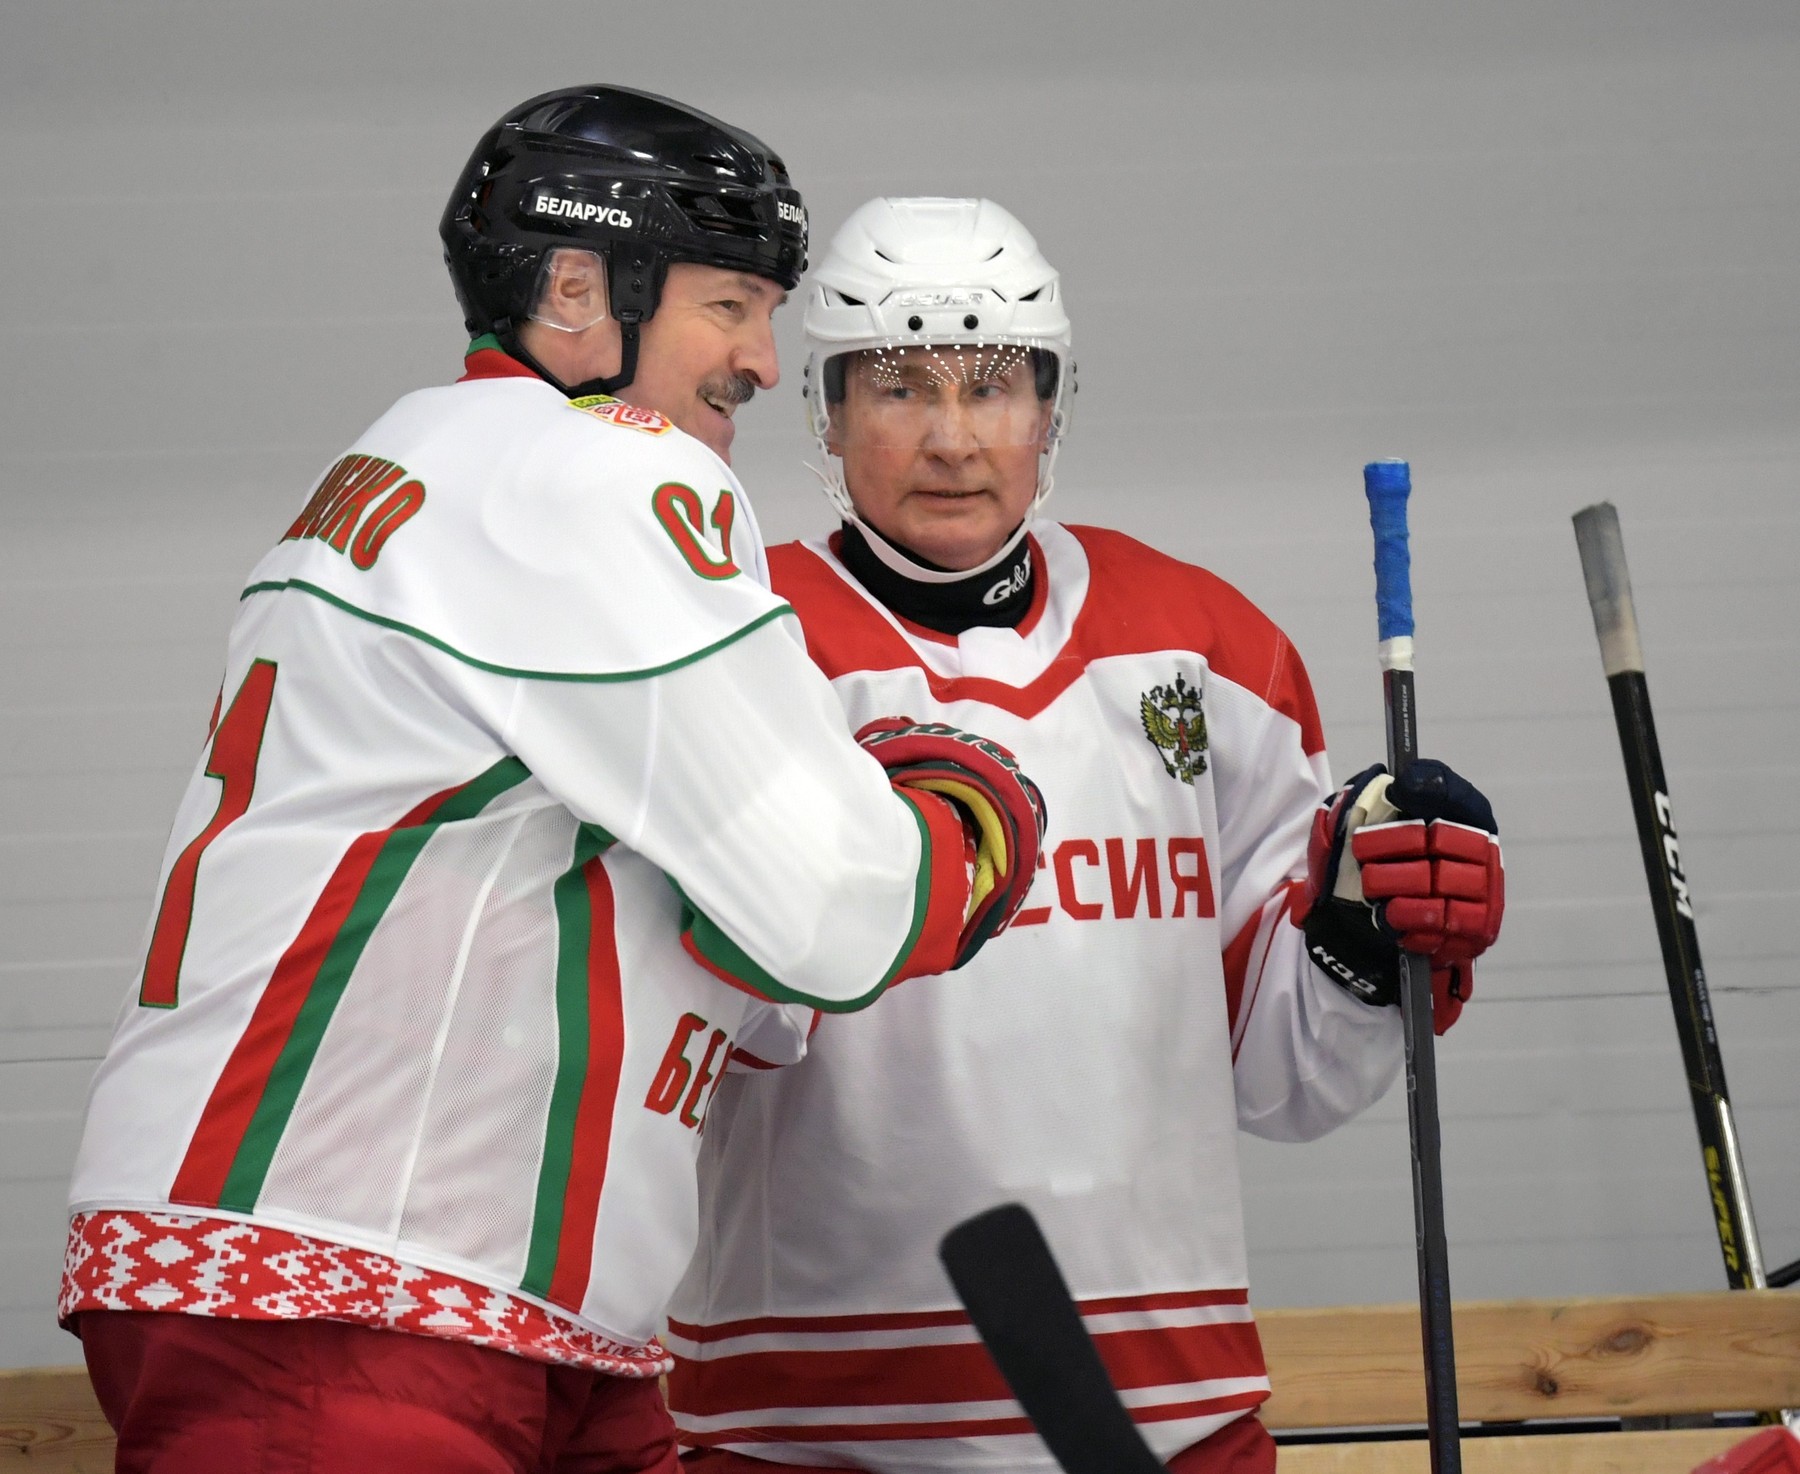 Working trip of Russian President Vladimir Putin to St. Petersburg. A friendly ice hockey match between Russian President Vladimir Putin and Belarusian President Alexander Lukashenko at the ice palace of the Manezh children's and youth sports school in Strelna. Russian President Vladimir Putin (right) and Belarusian President Alexander Lukashenko (left) during a match.
29.12.2021 Russia, St. Petersburg,Image: 649751978, License: Rights-managed, Restrictions: *** World Rights Except Russian Federation, Switzerland and Liechtenstein ***, Model Release: no, Credit line: Profimedia